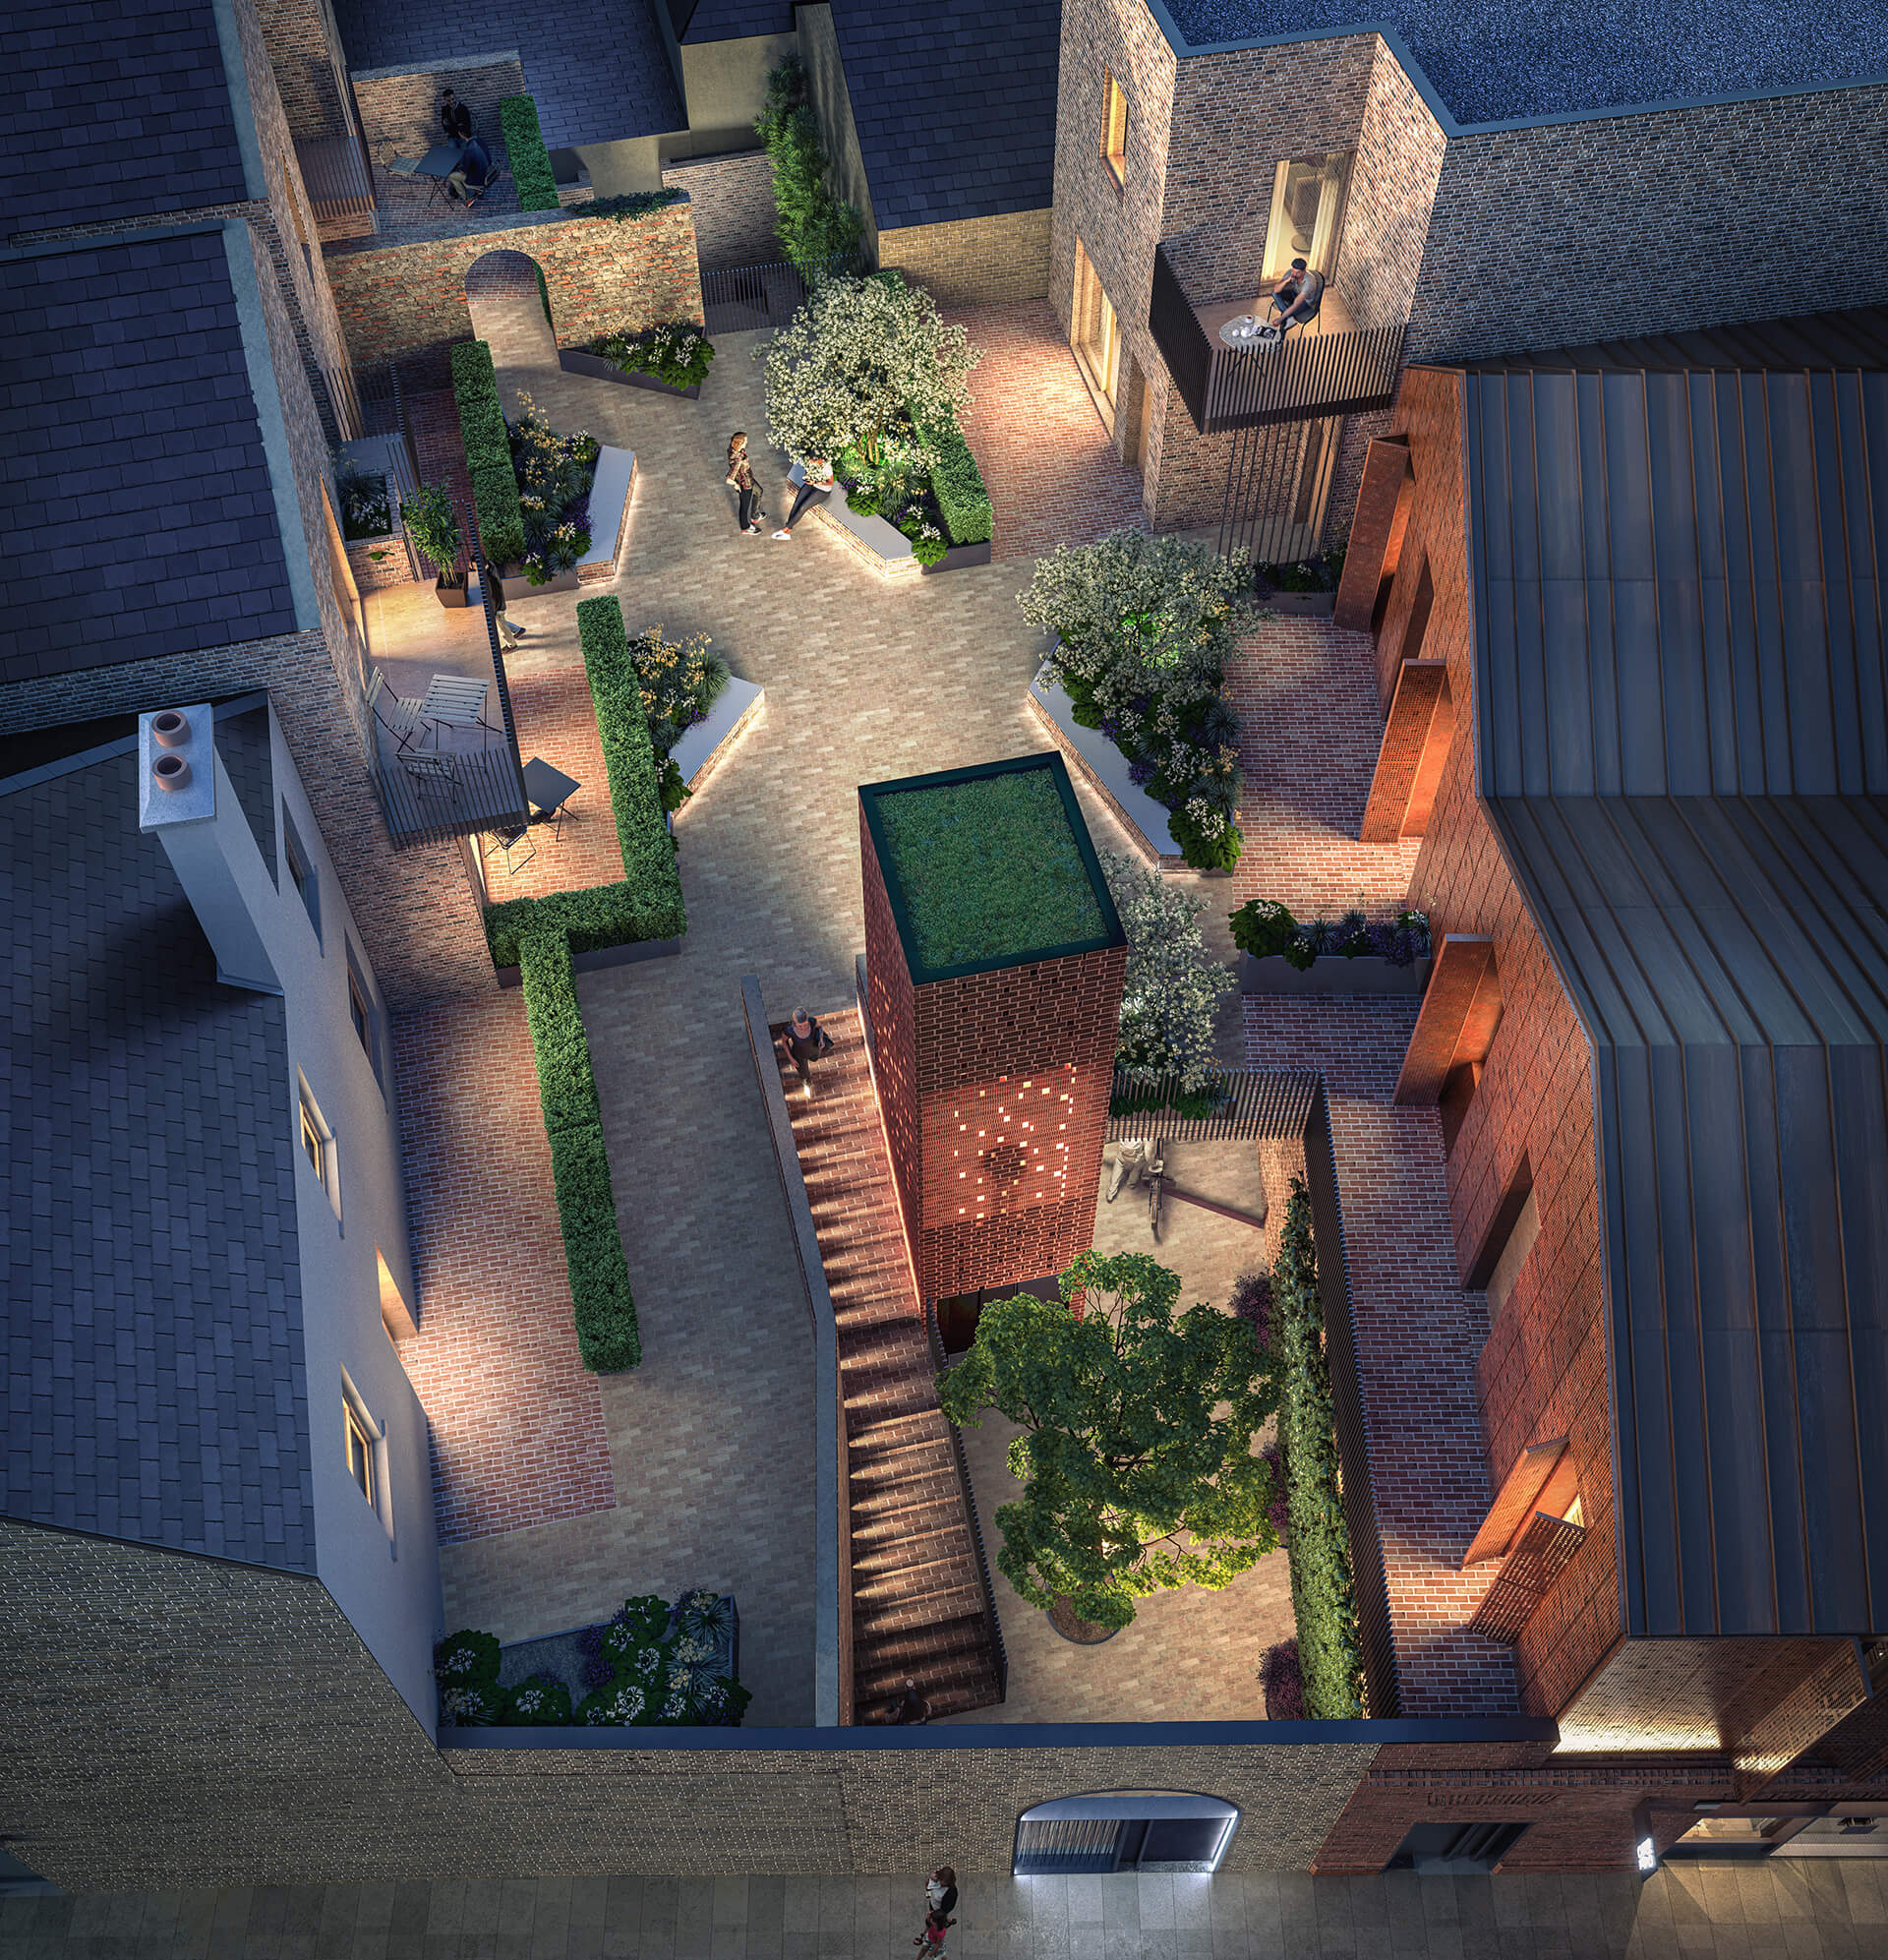 RESIDENTIAL COURTYARD